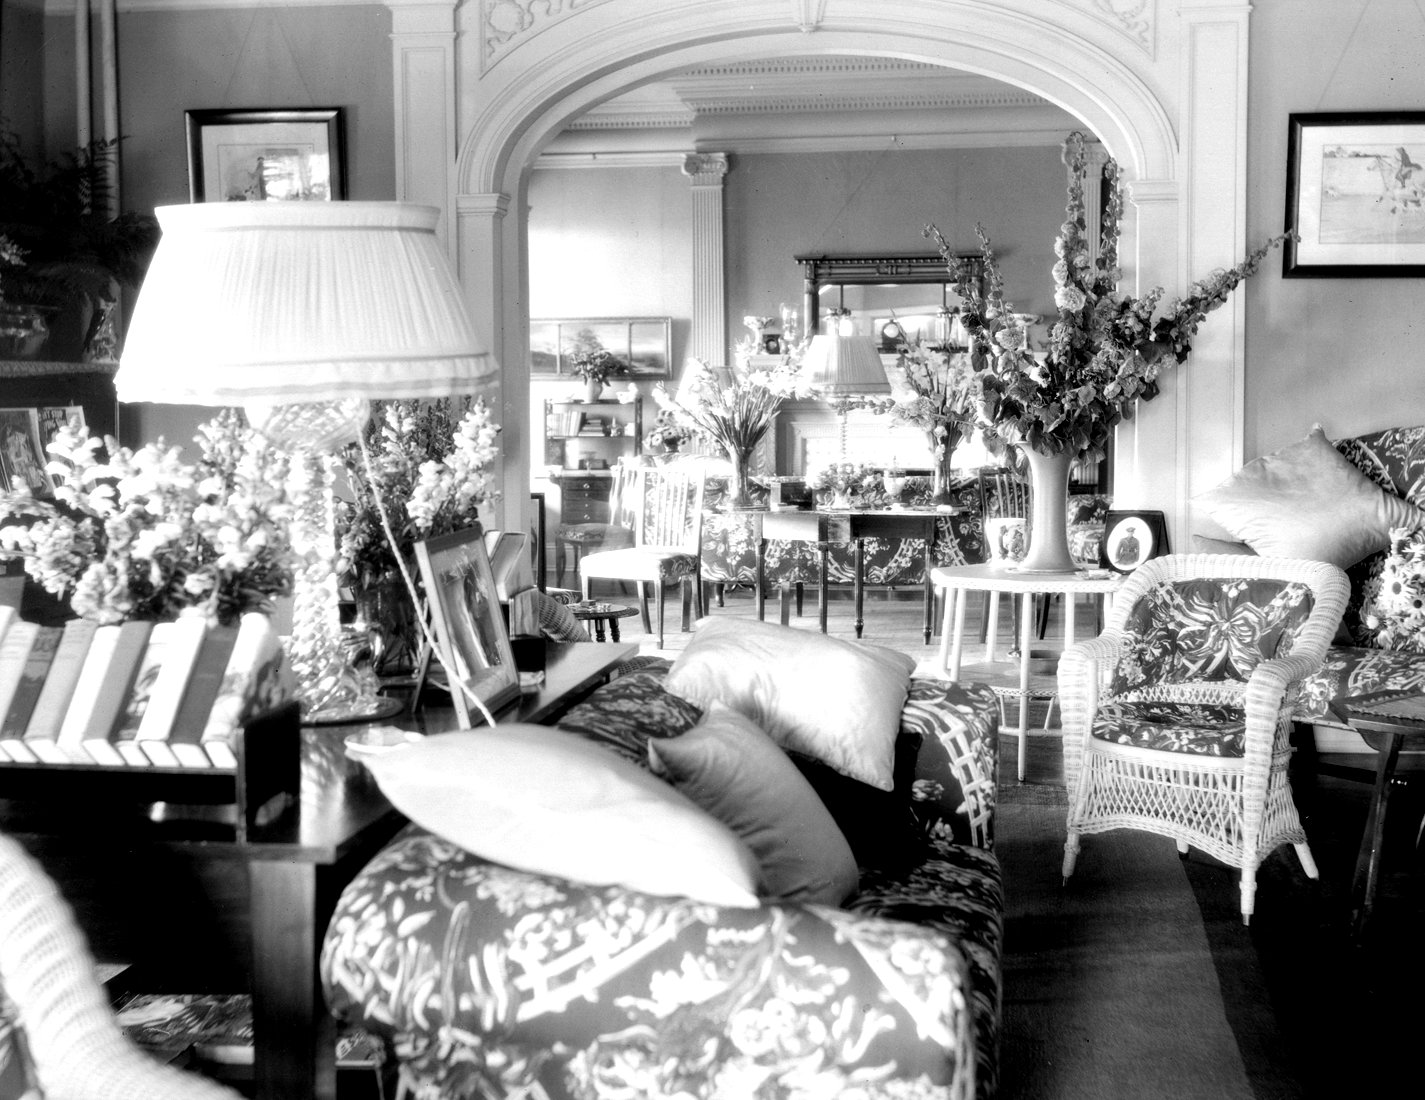 The bright living room of a summer home decorated with bouquets of flowers.